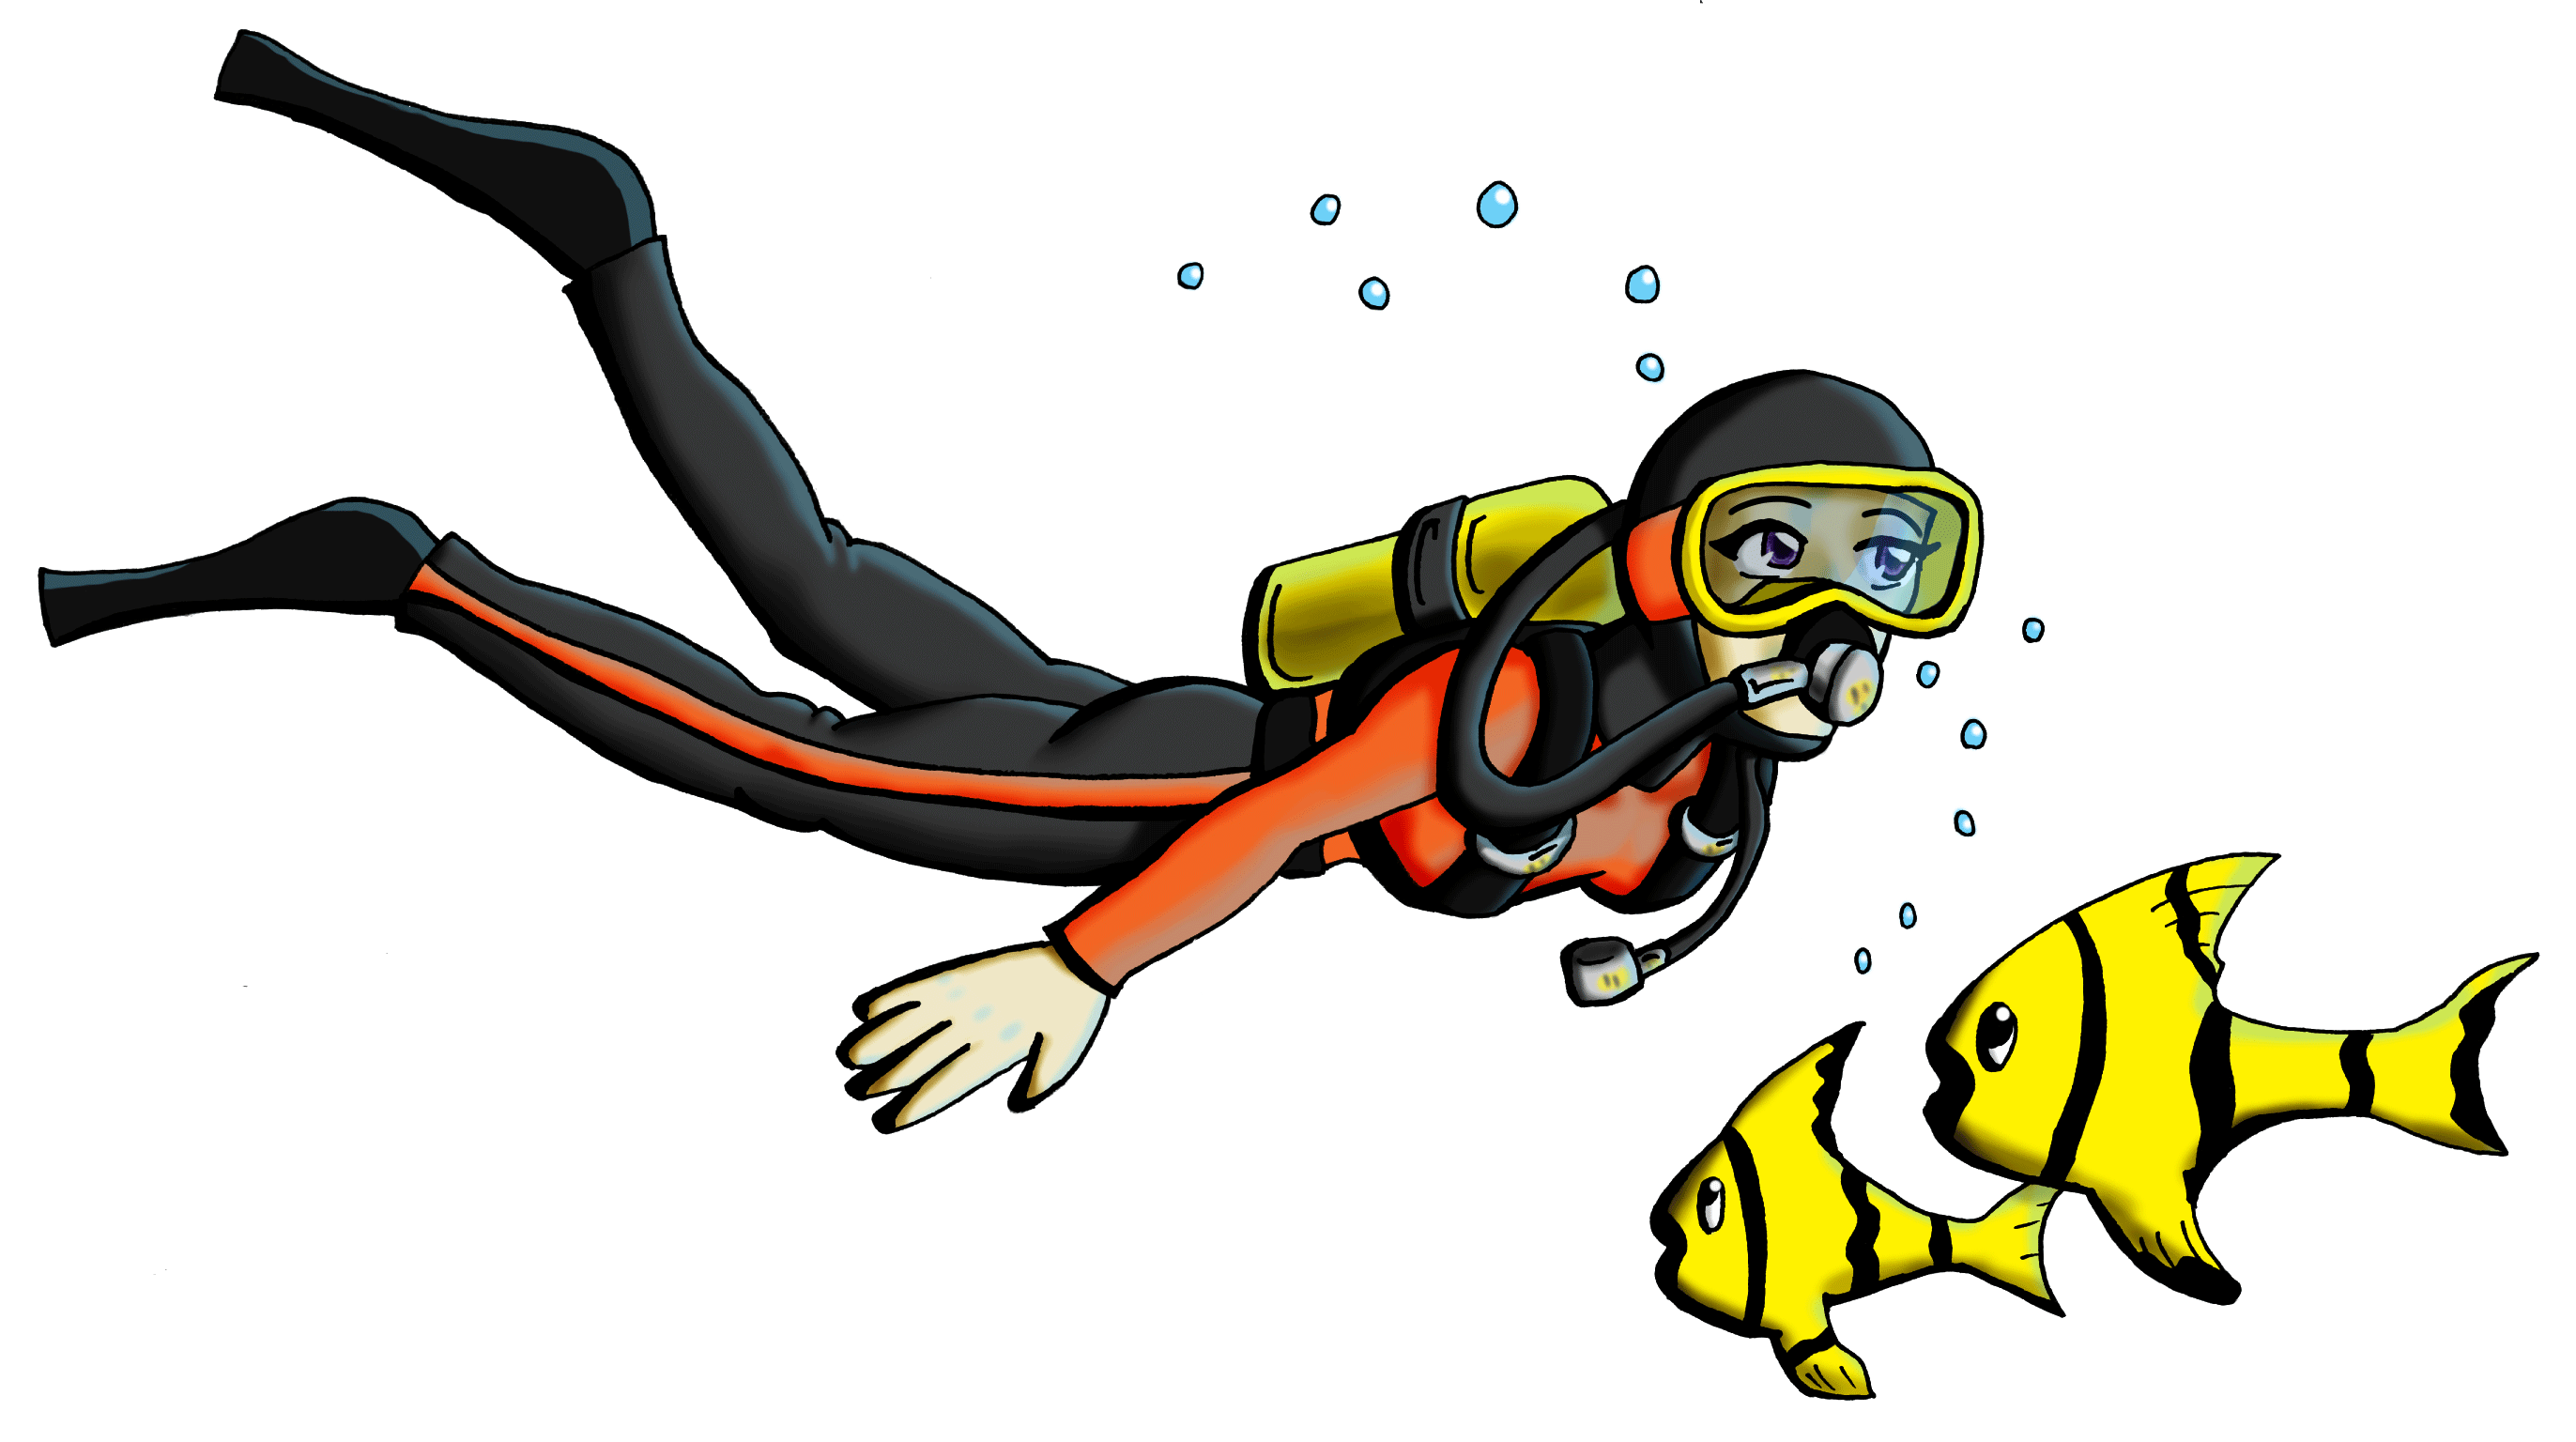 Scuba Diver With Fish And Bubbles By Trice01 On Deviantart